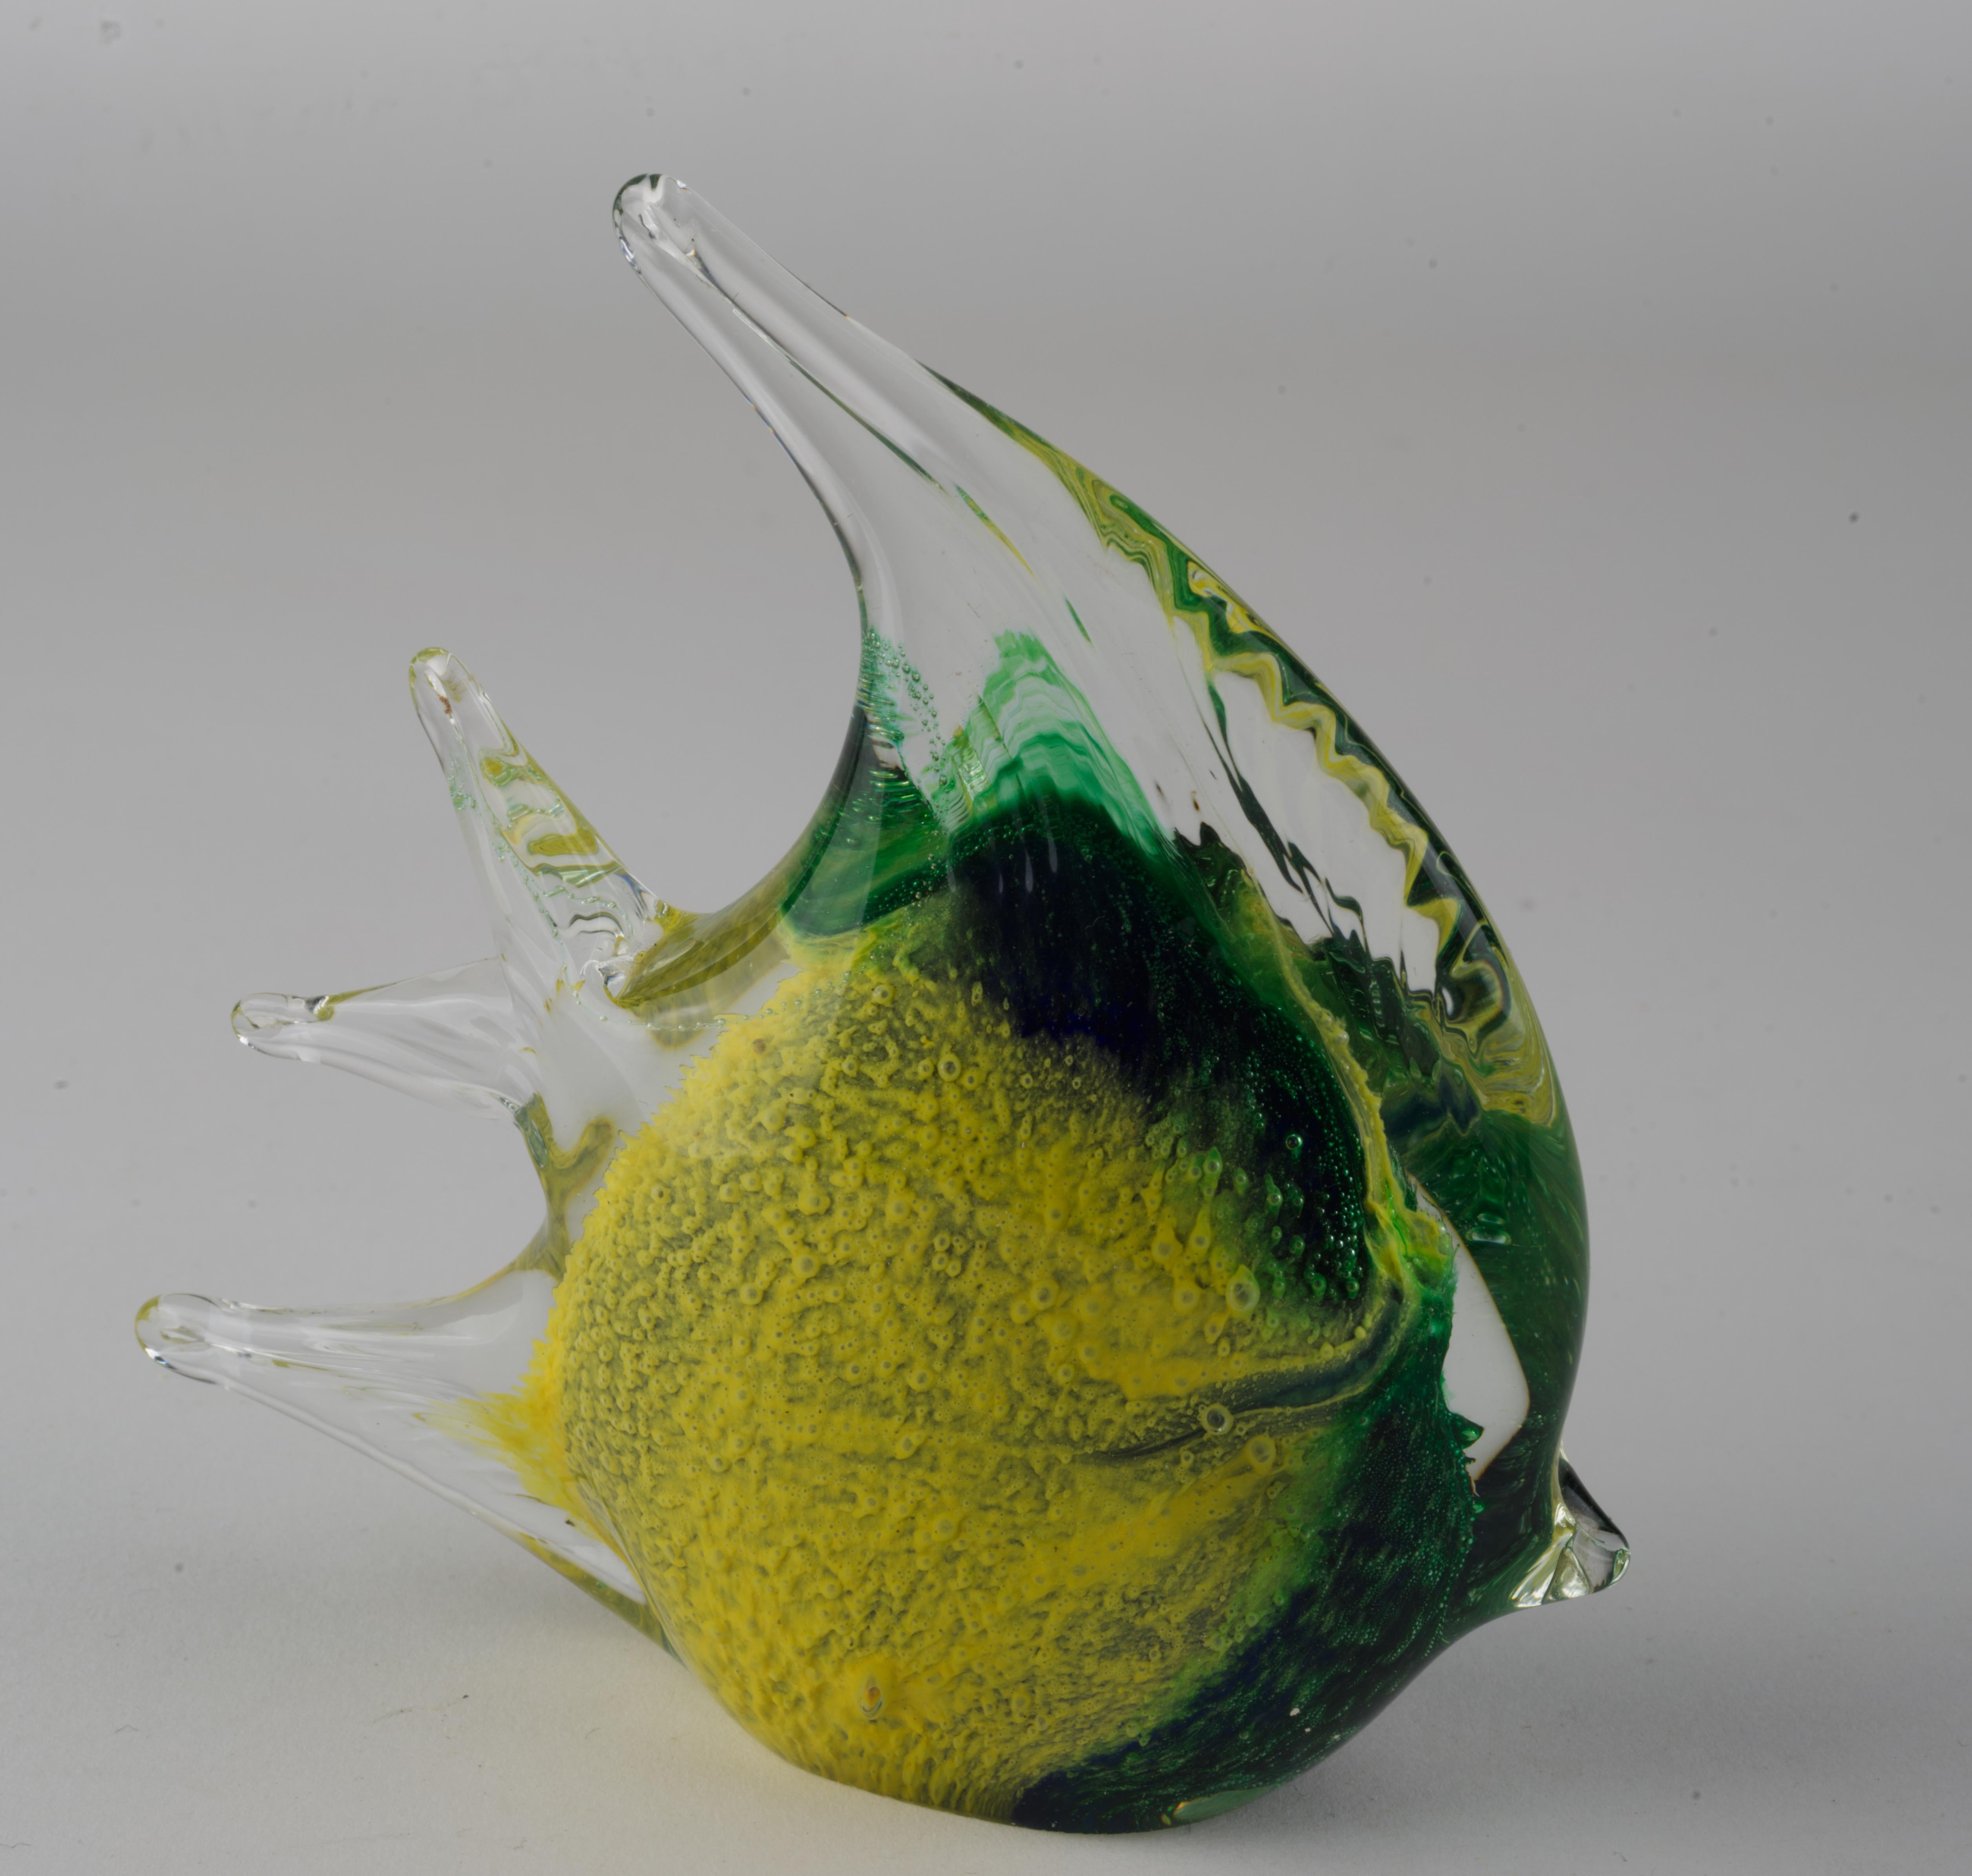 Festive green and yellow tropical fish figurine or paperweight is made in sommerso technique; colored glass gather, dipped into pigments, is cased over with clear glass. Controlled bubbles are used to give the piece animation and movement, accenting